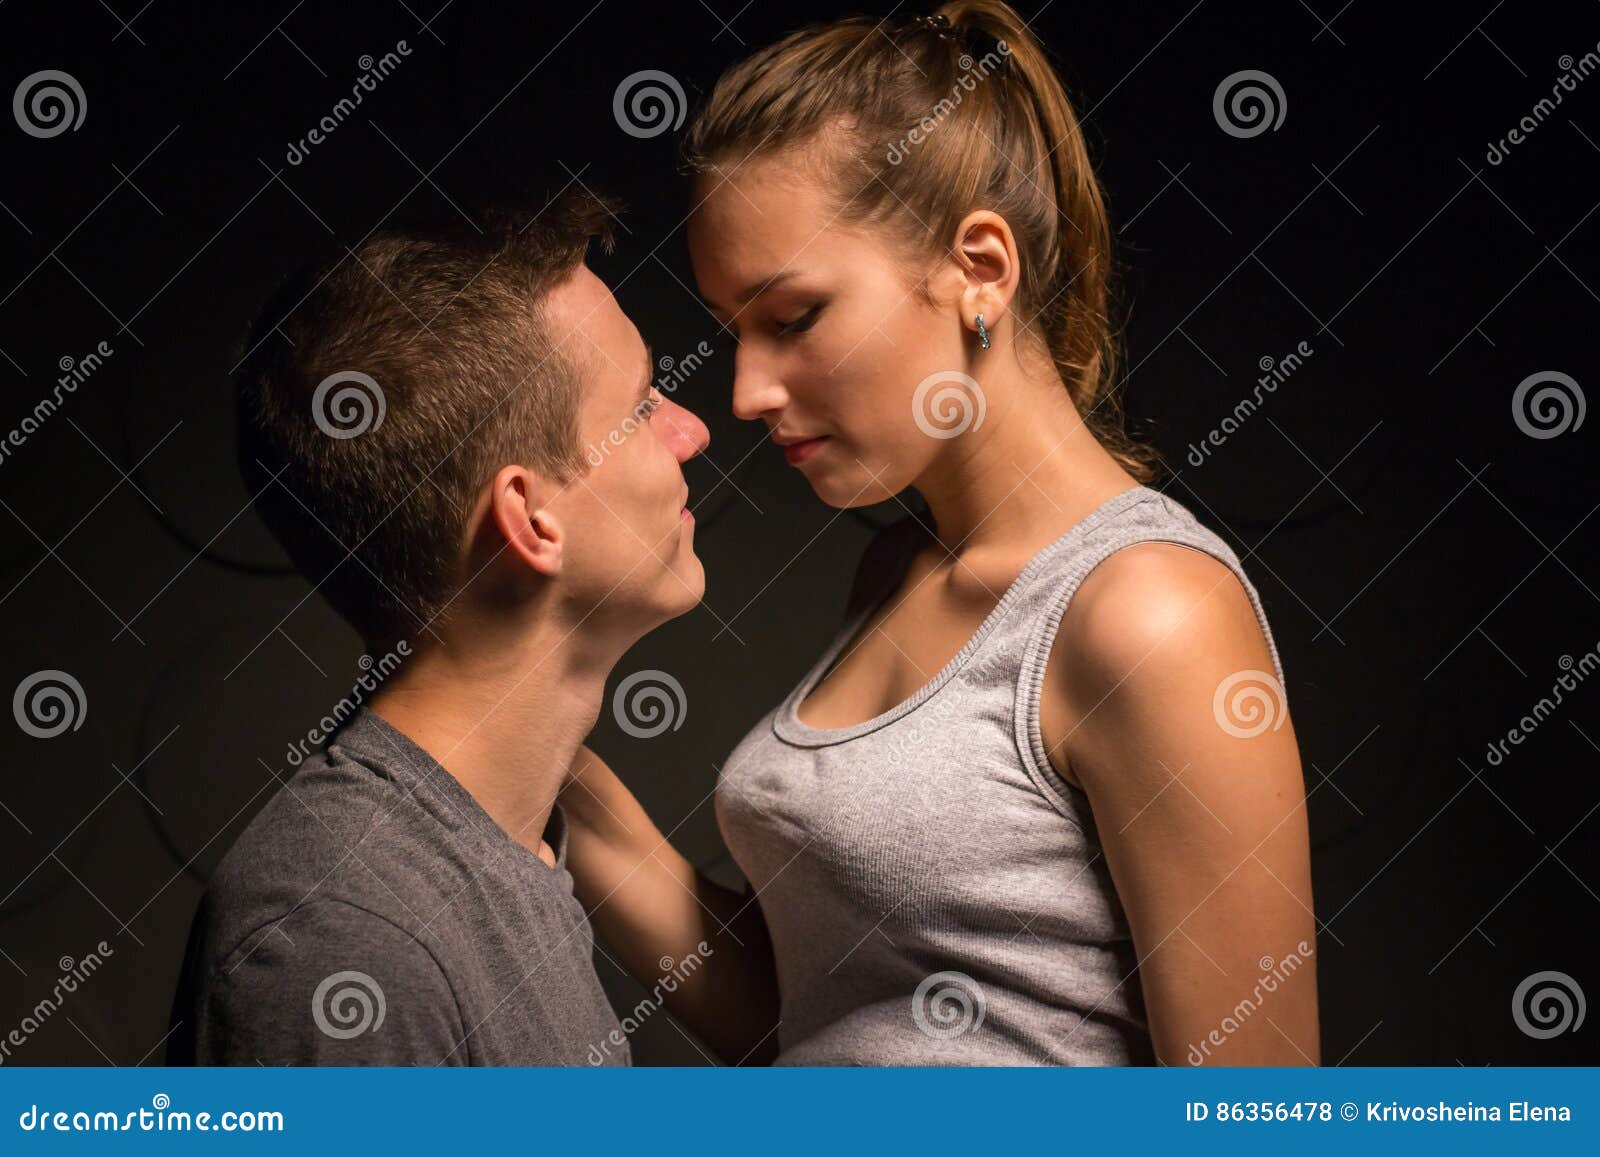 Passionate Young Couple In The Room Stock Photo Image Of Da